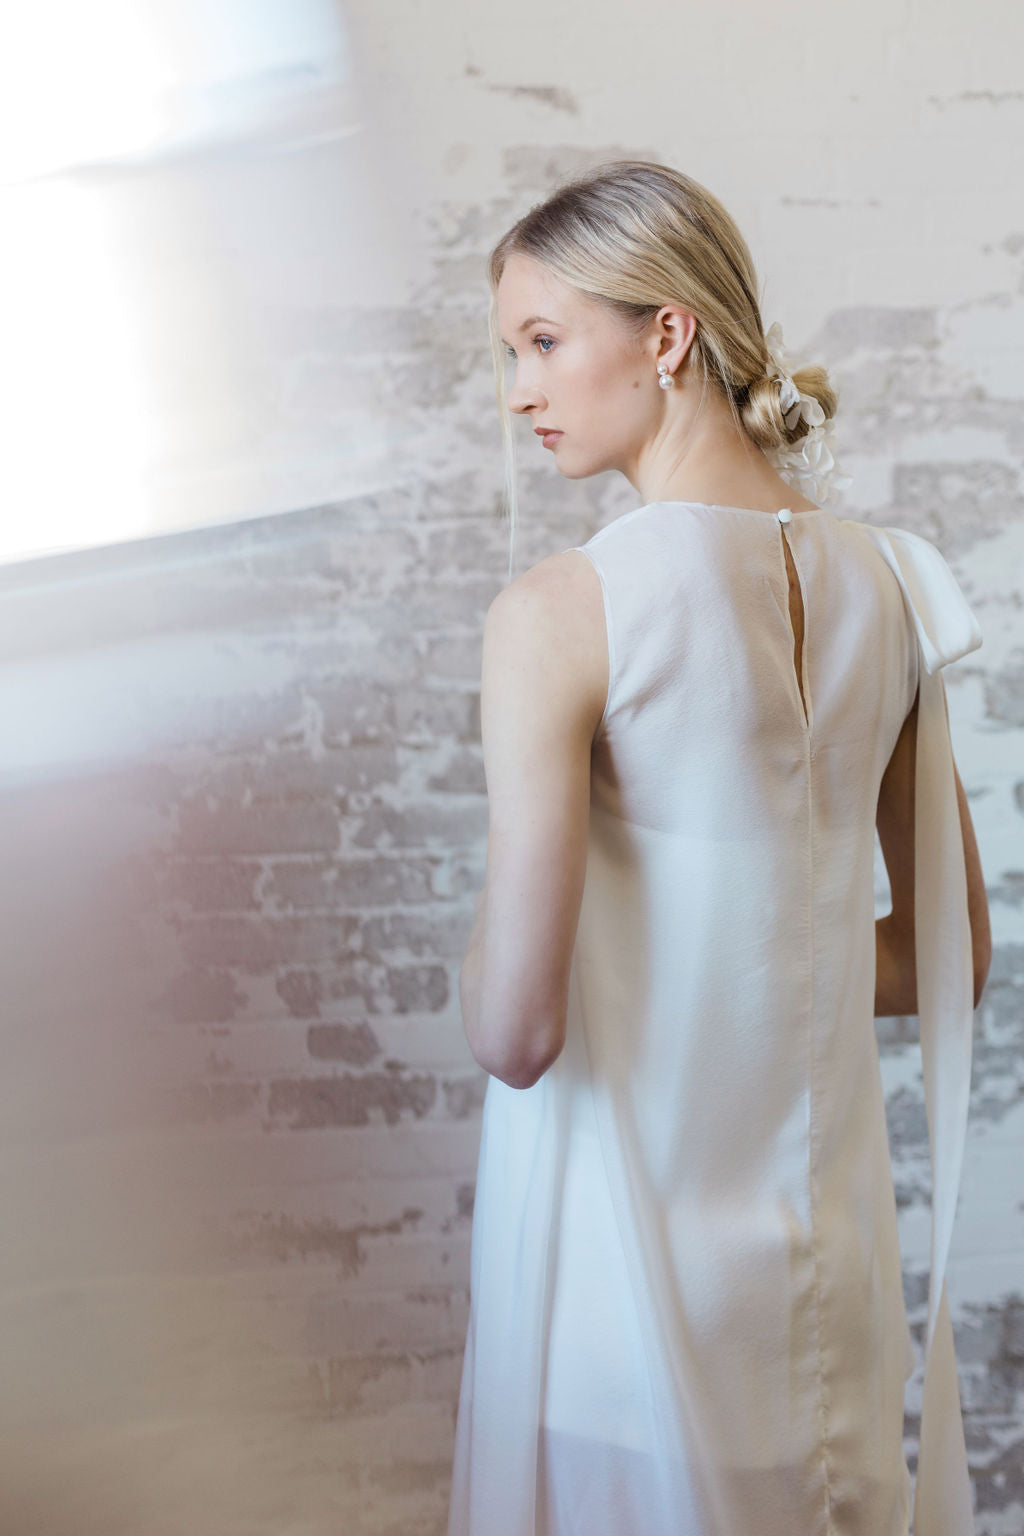 Modern wedding tunic and skirt. Sheer minimalist bridal separates. Designed and hand made in Canada.